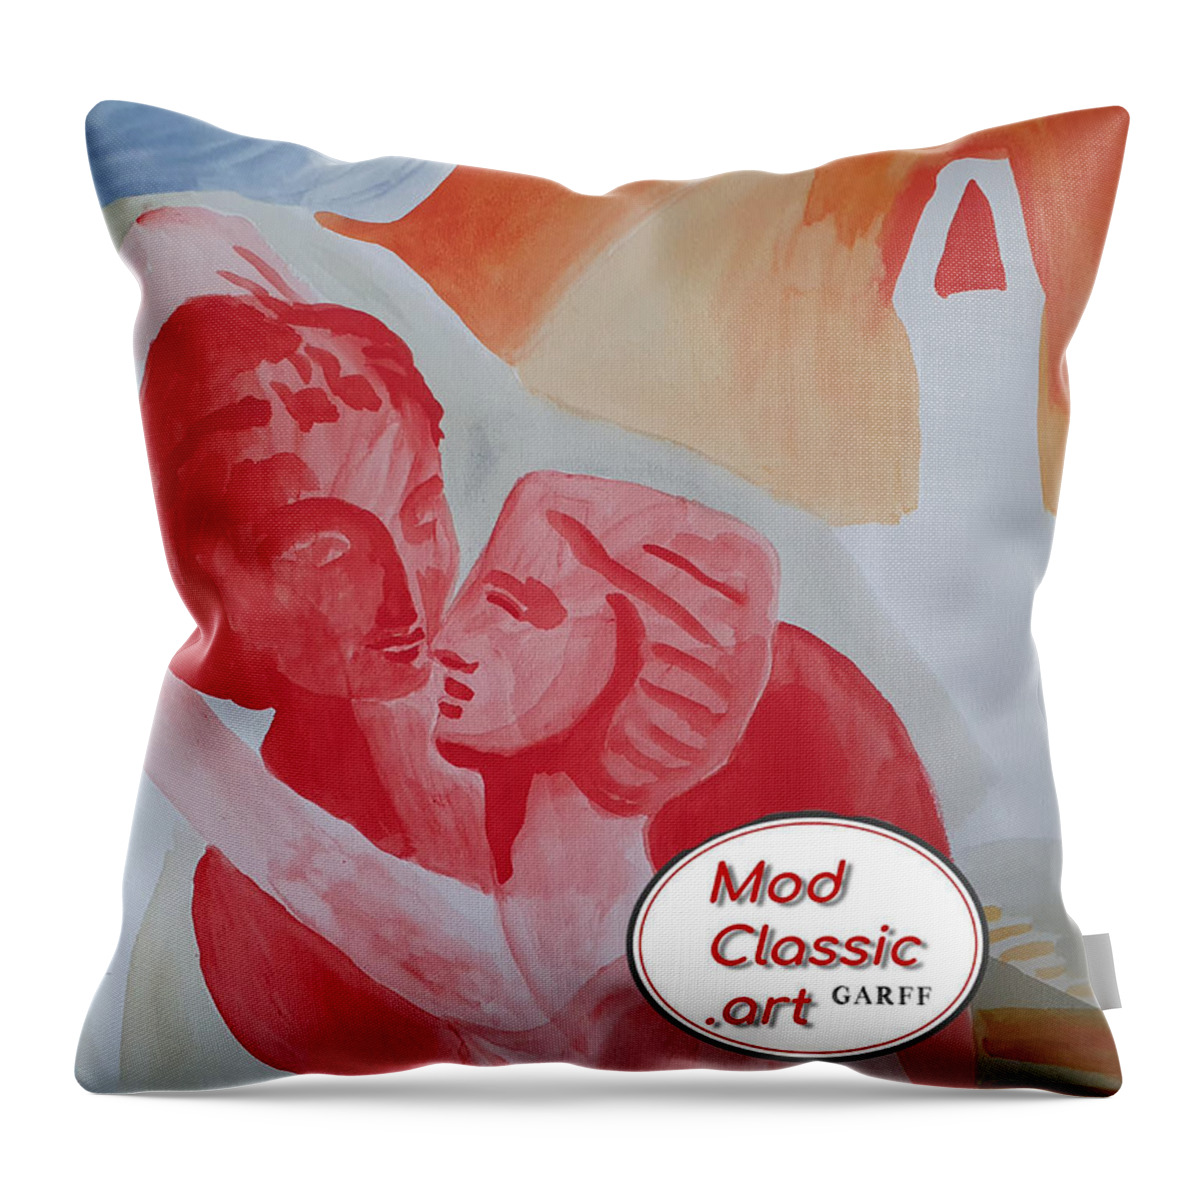 Fine Art Investments Throw Pillow featuring the painting Artchetypal Couple ModClassic Art by Enrico Garff